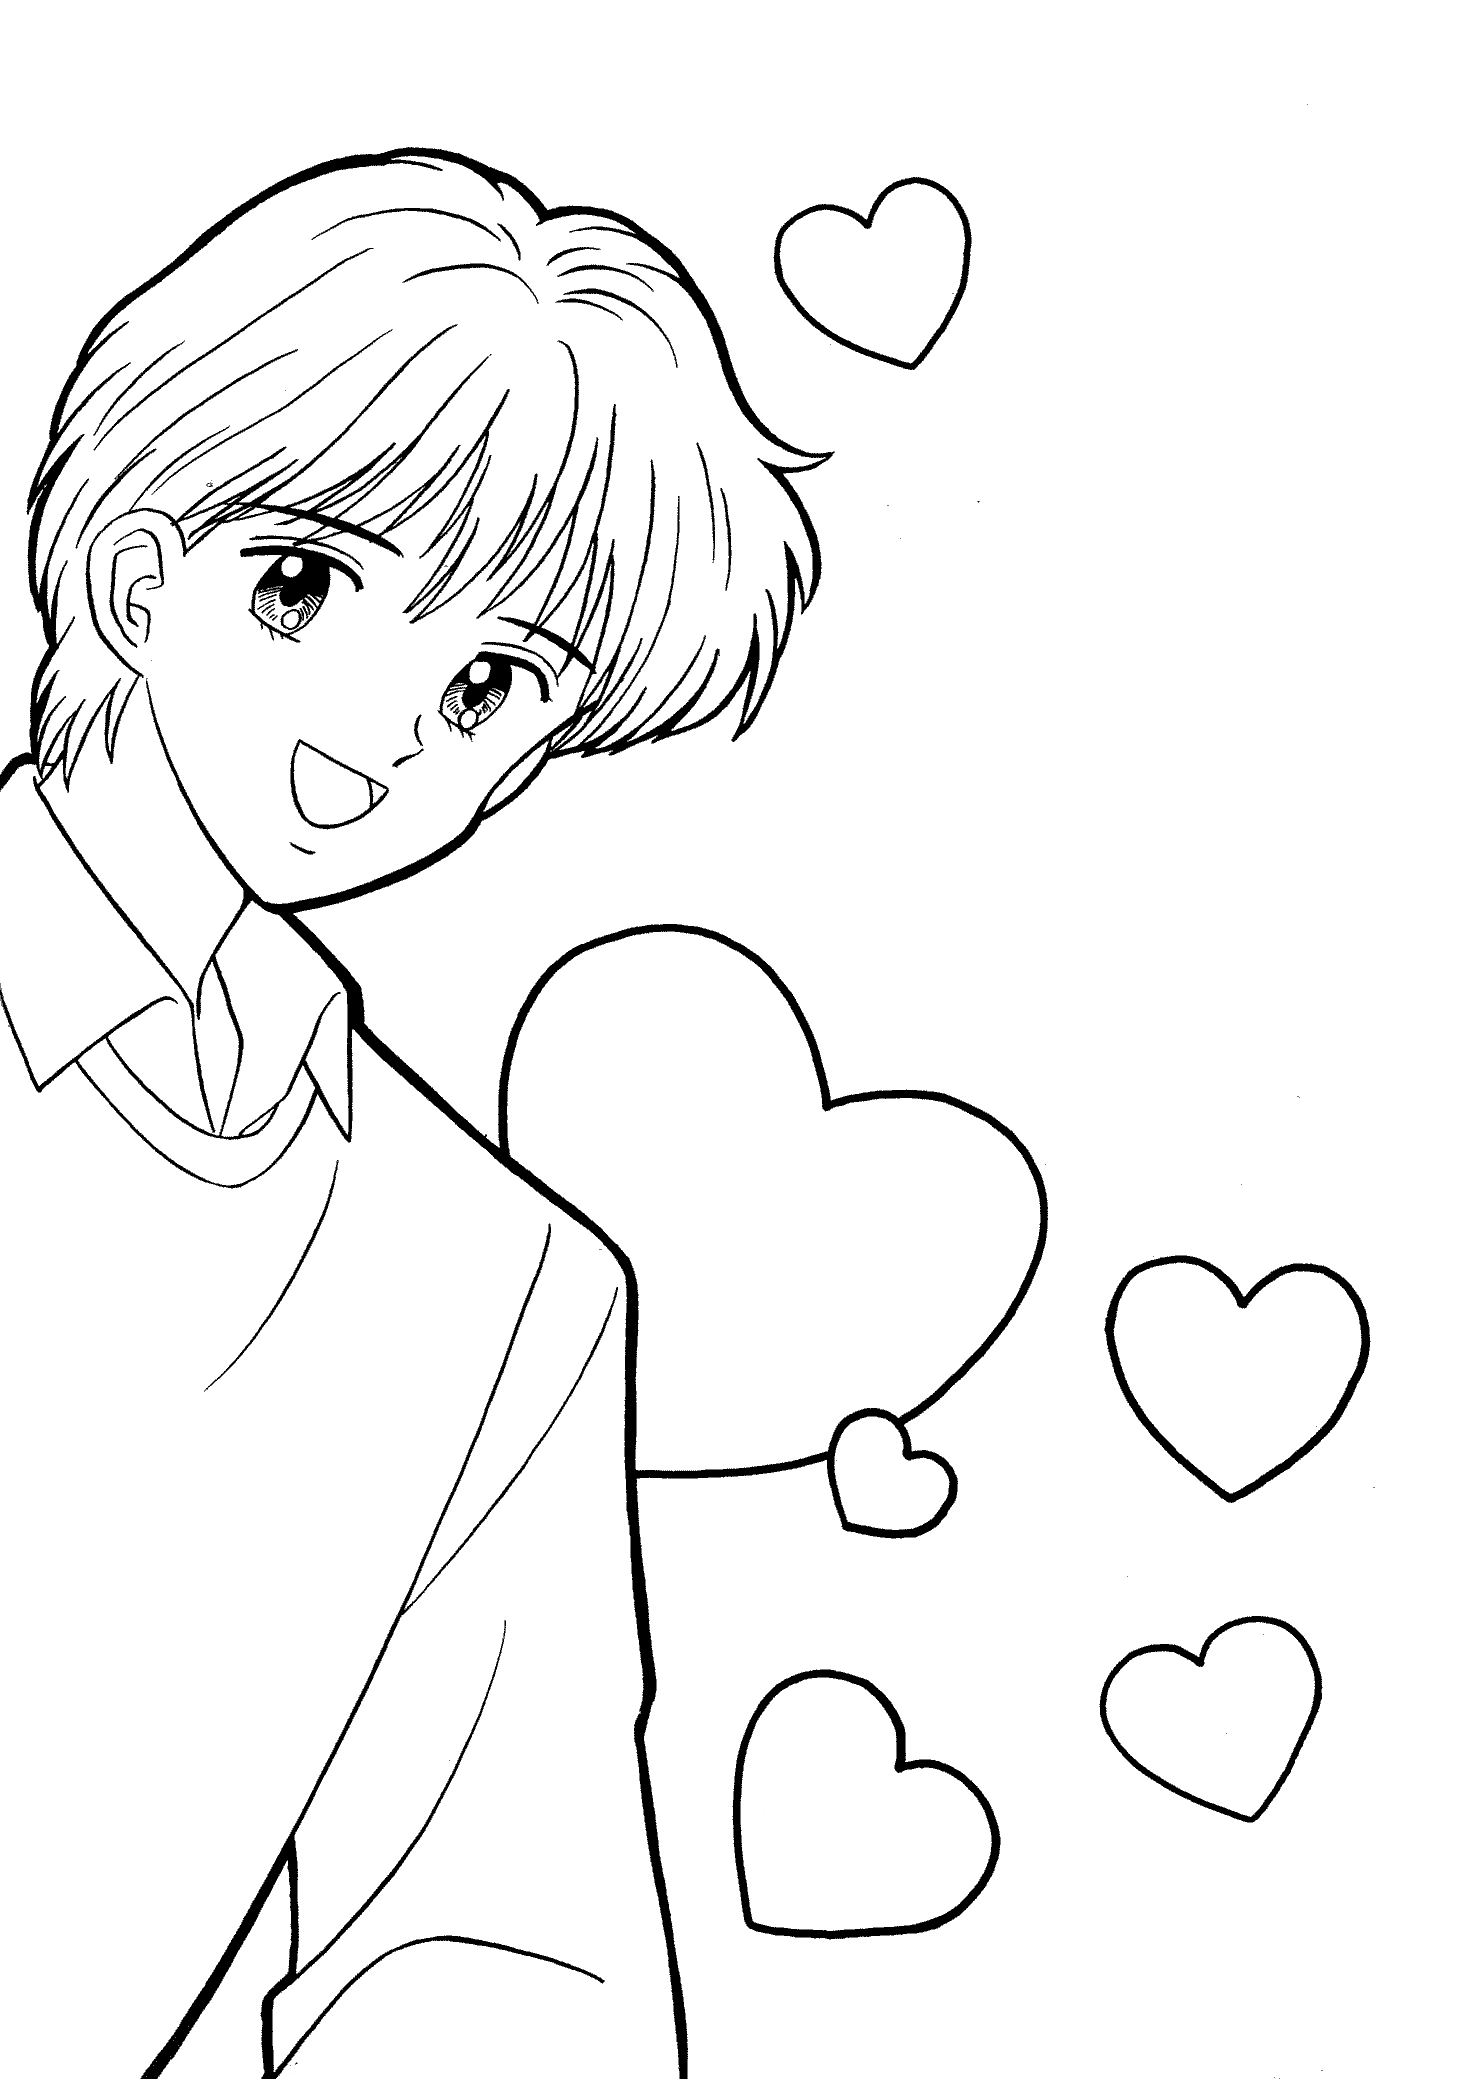 Yuu Marmalade boy coloring pages for kids, printable free 